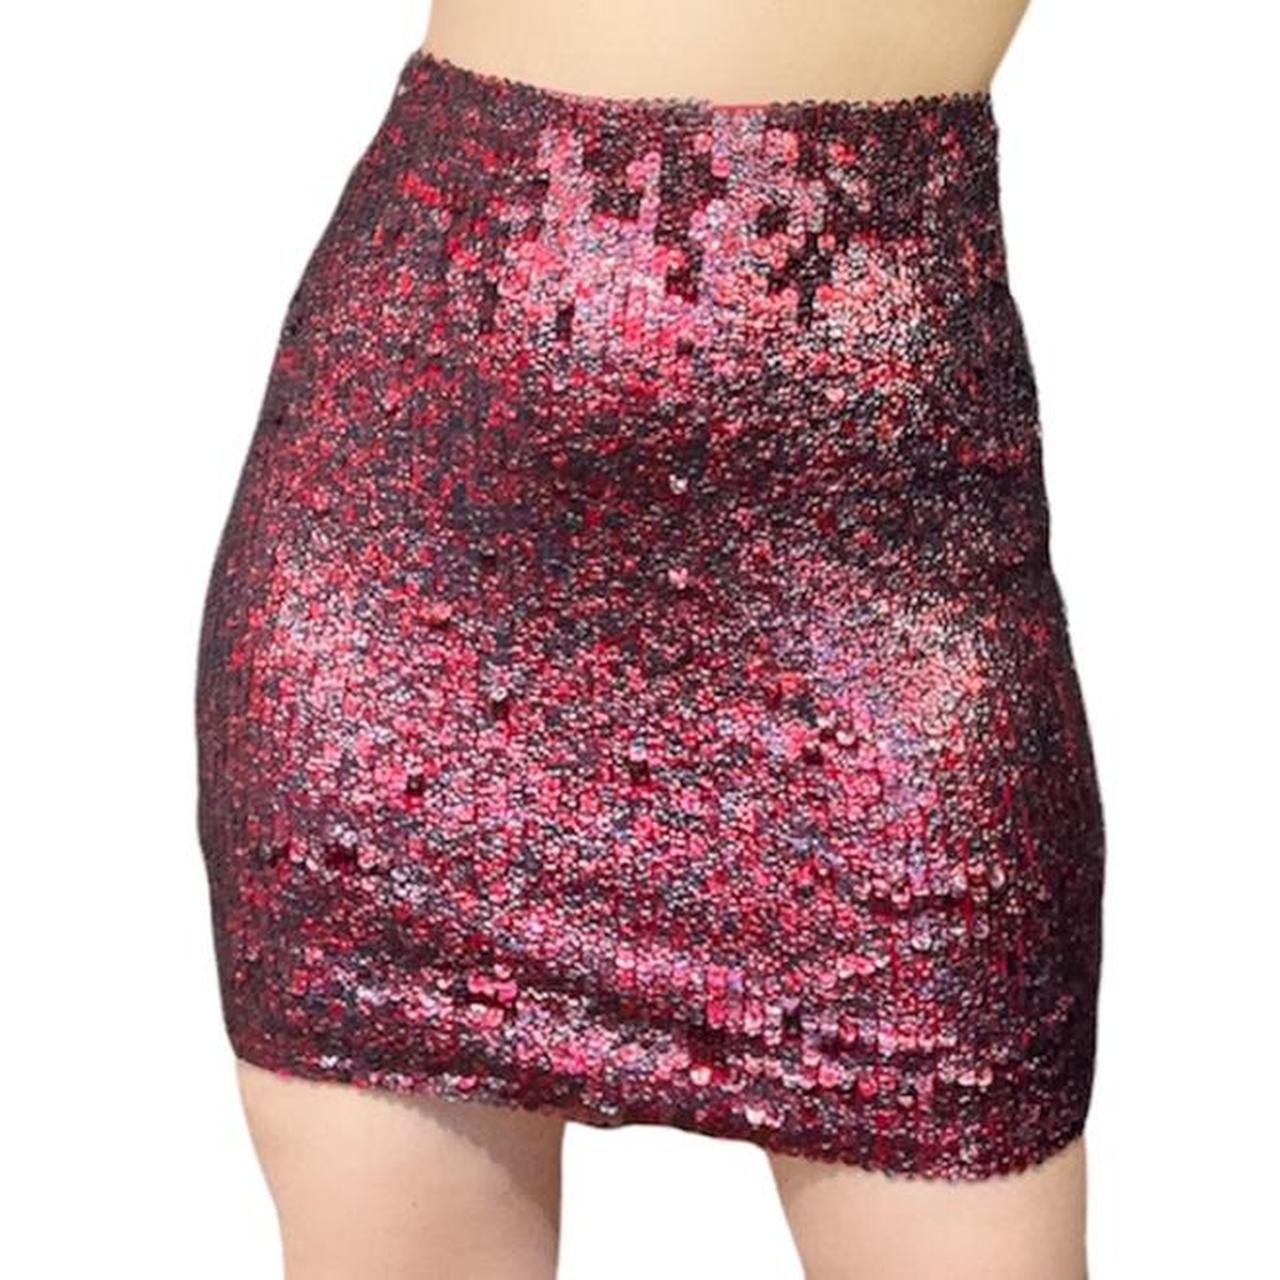 Product Image 1 - Red Sequin Mini Skirt by